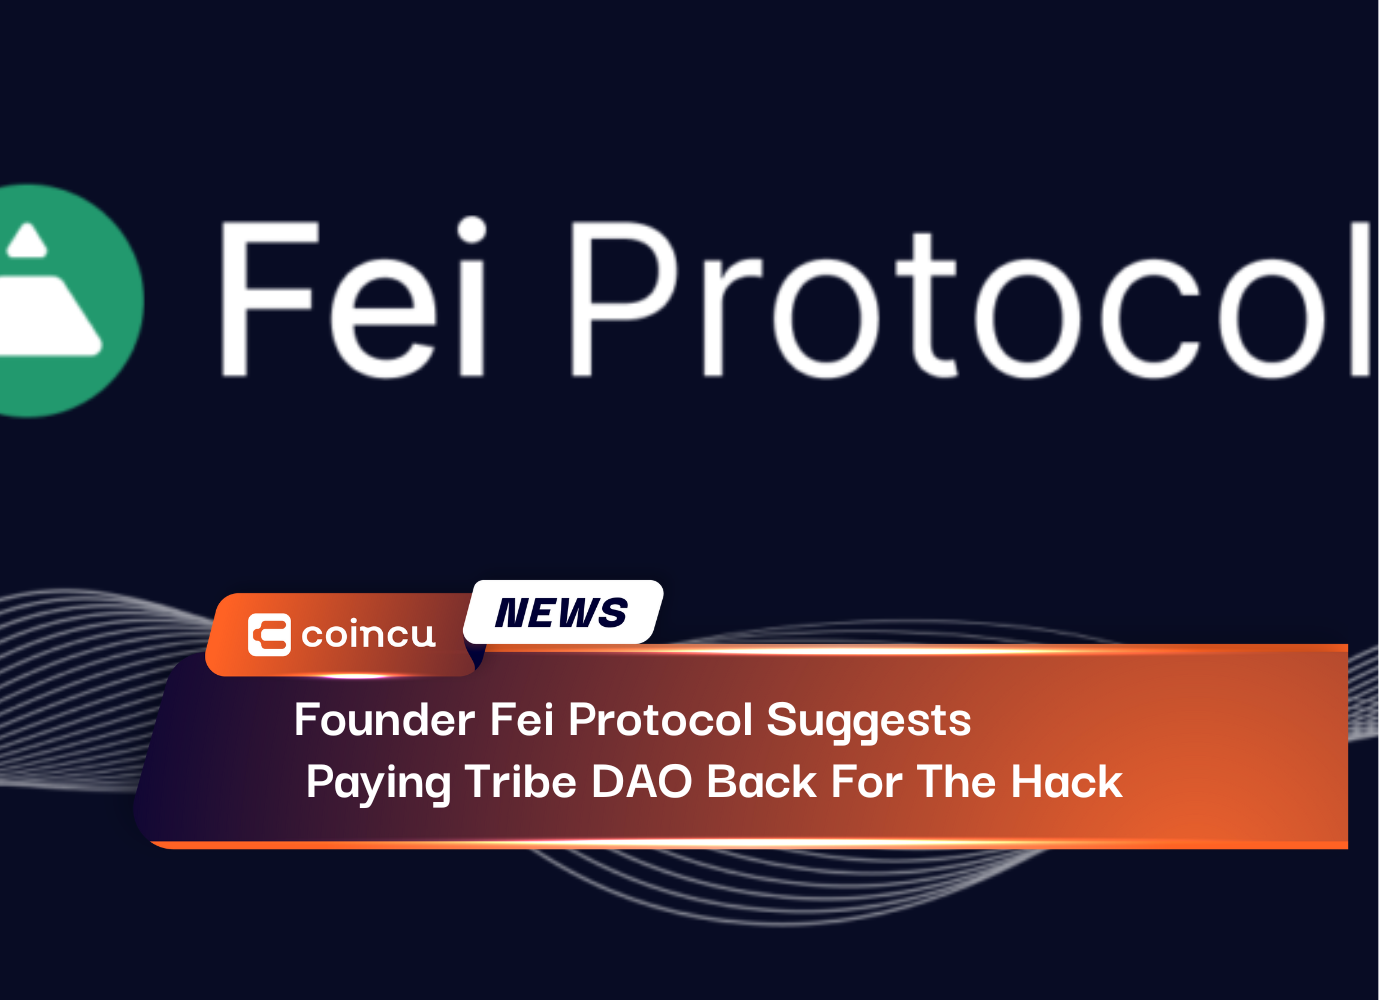 Founder Fei Protocol Suggests